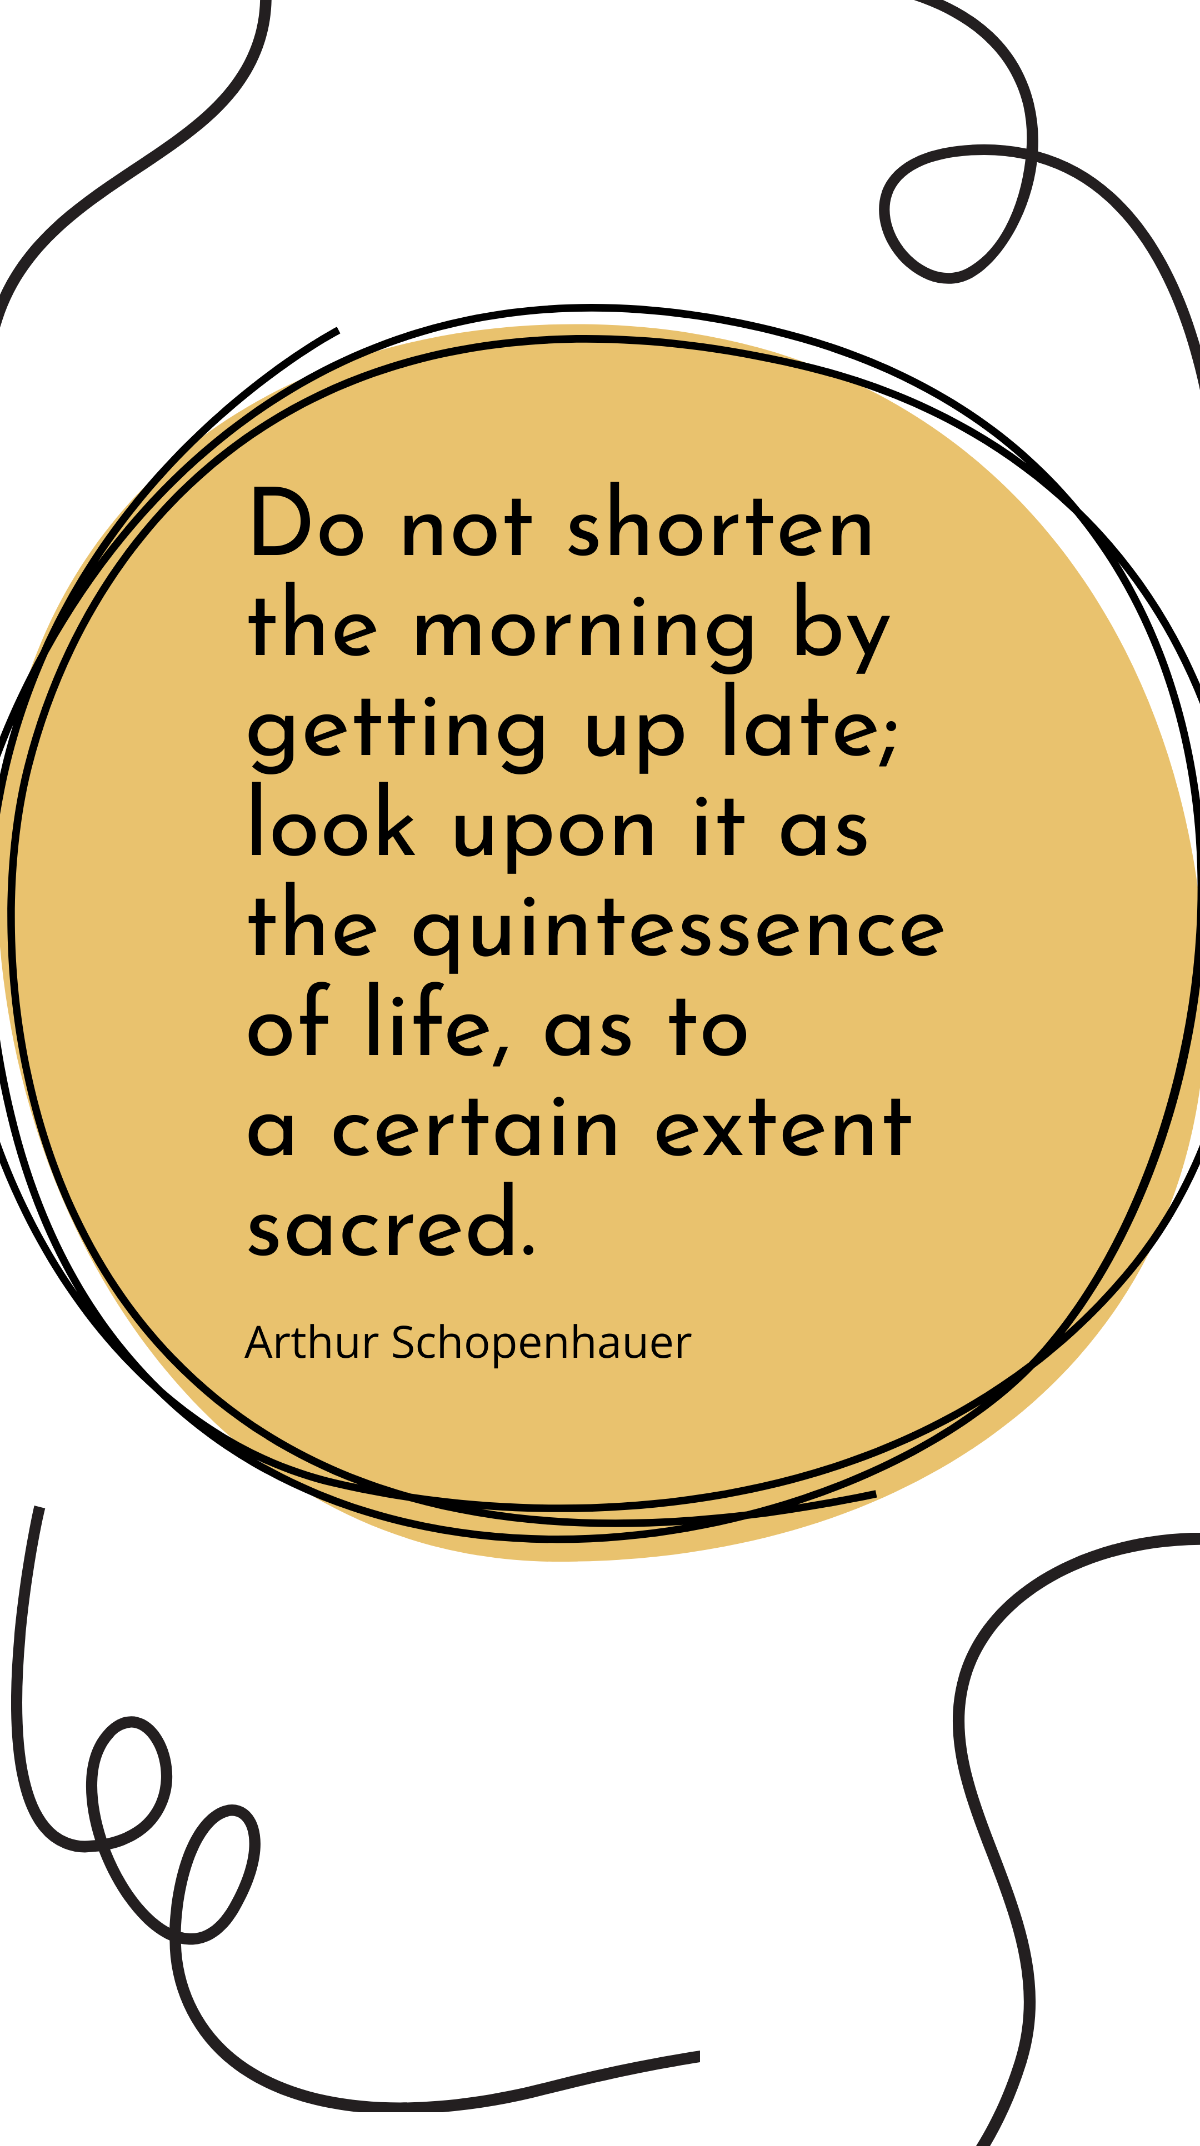 Arthur Schopenhauer - Do not shorten the morning by getting up late; look upon it as the quintessence of life, as to a certain extent sacred. Template